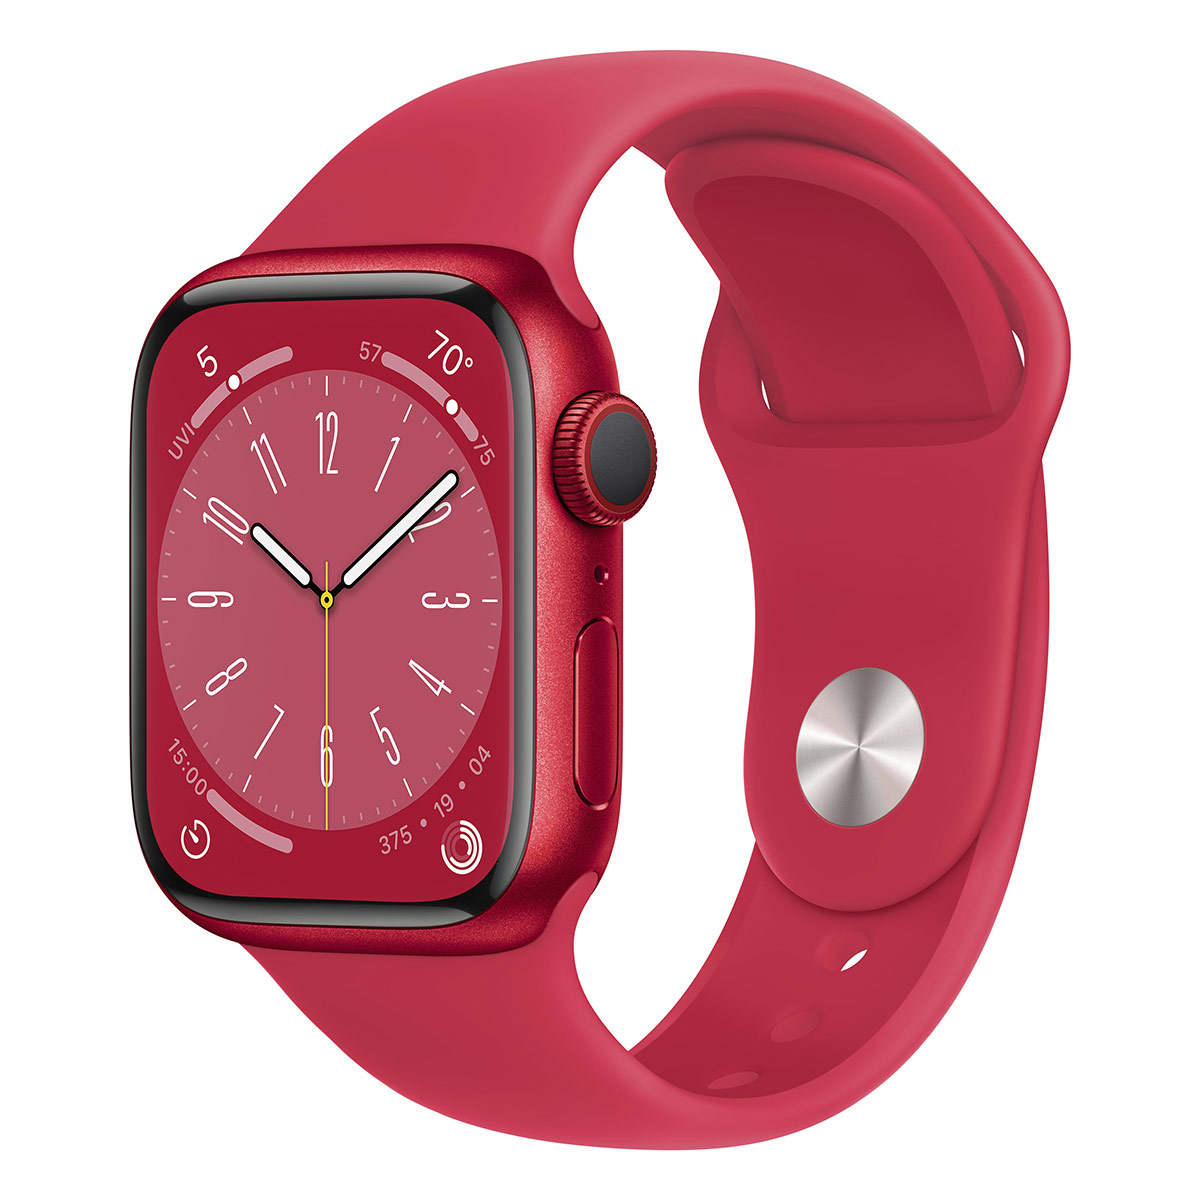 Apple - Reloj Smartwatch Apple Watch Series 8 GPS LTE 41mm Aluminio (Product)RED con Correa Deportiva (Product)RED